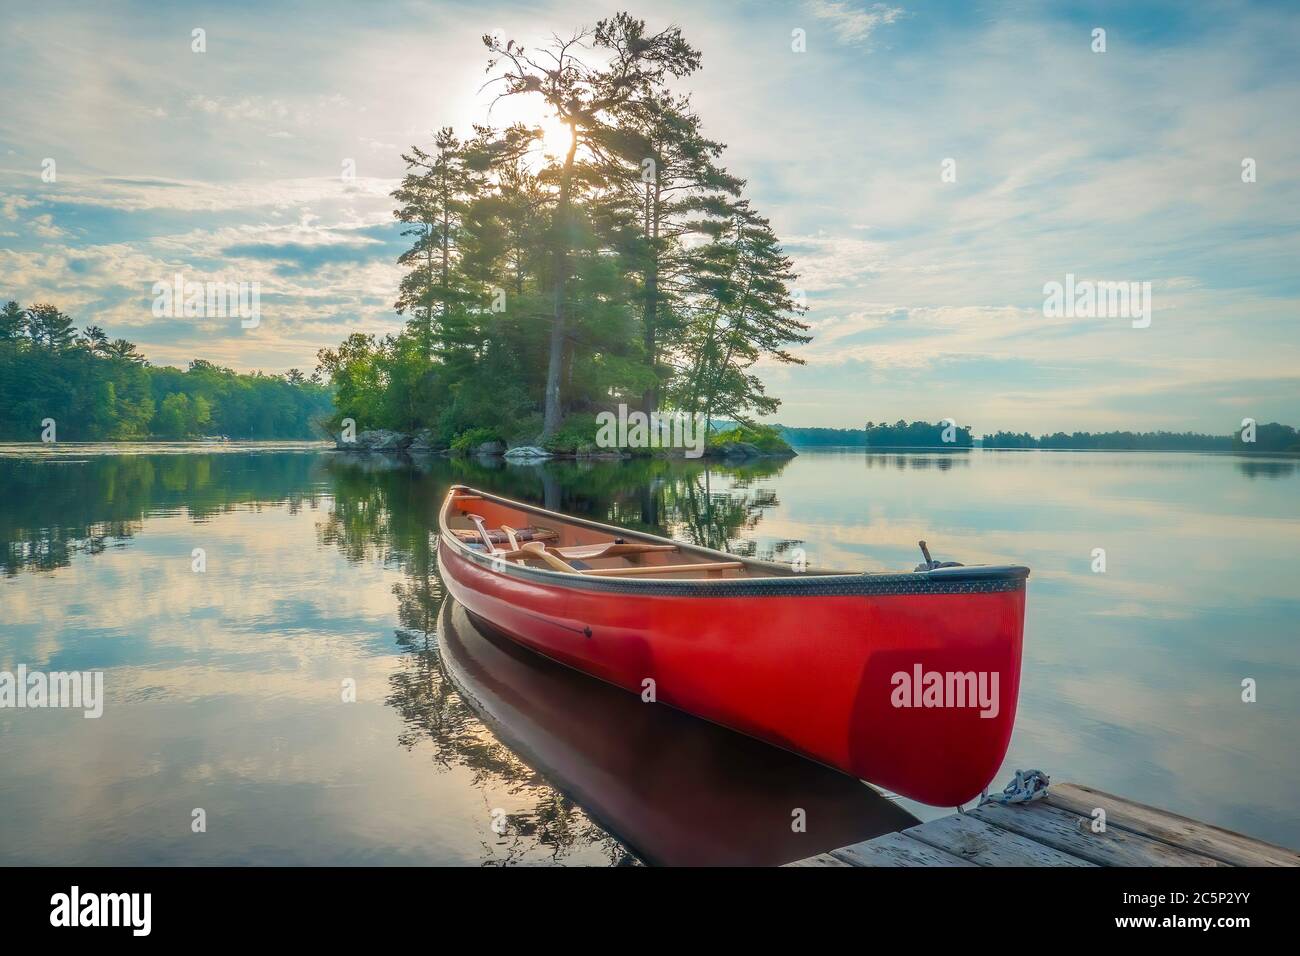 Canoe tied to a dock on the calm waters of Stony Lake in the early morning when it is calm and serene, Stock Photo